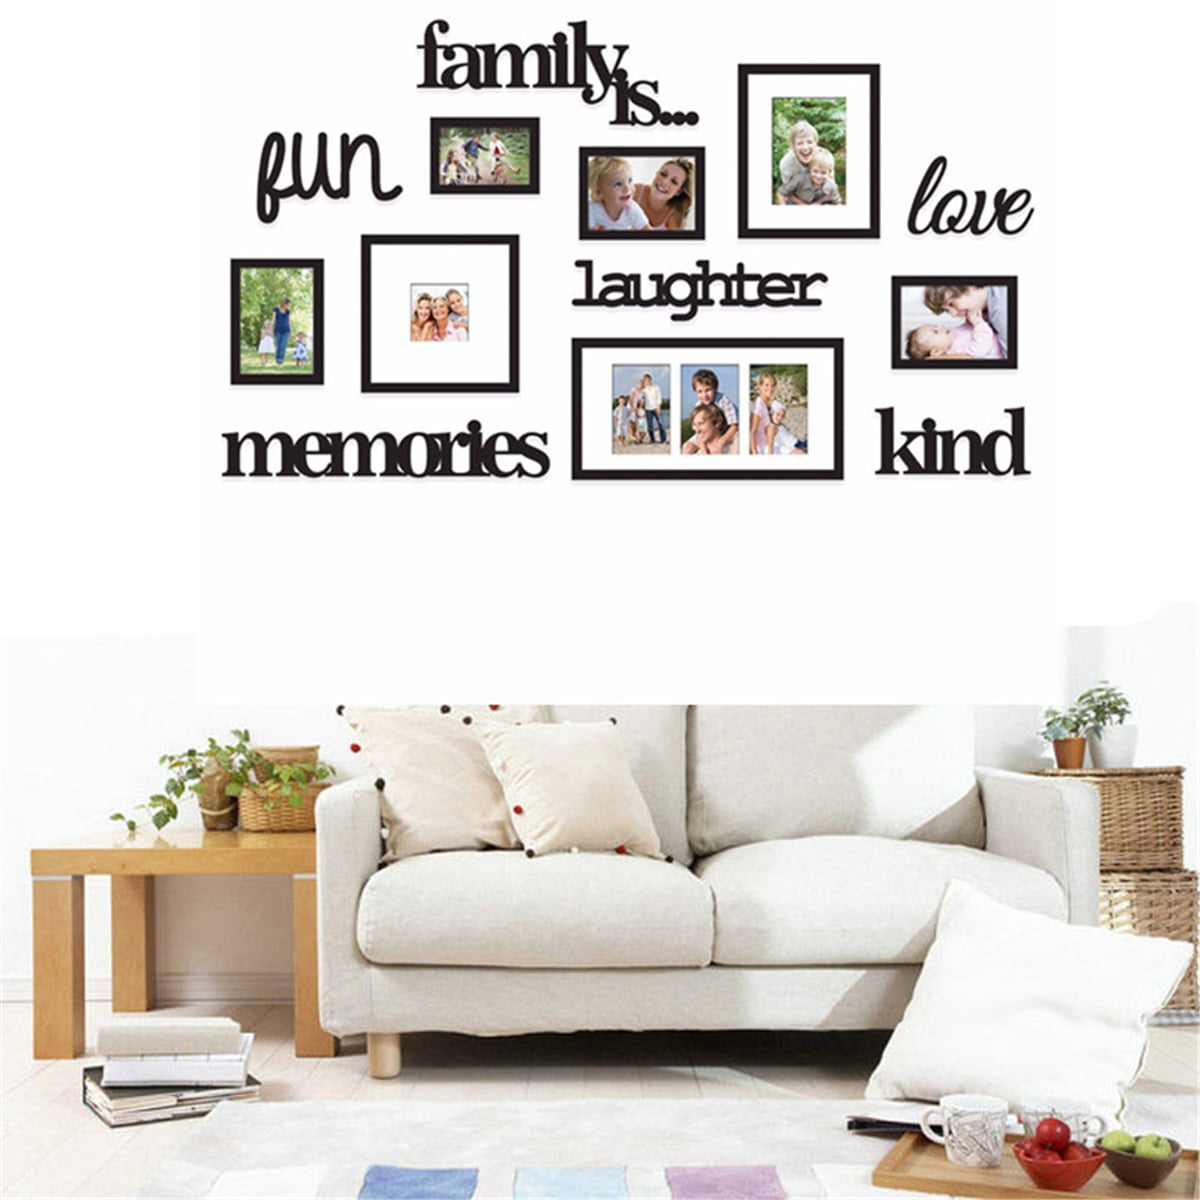 3D Family Tree Acrylic Photo Picture Collage Frame Kit Wall Art Home Decor Gift 